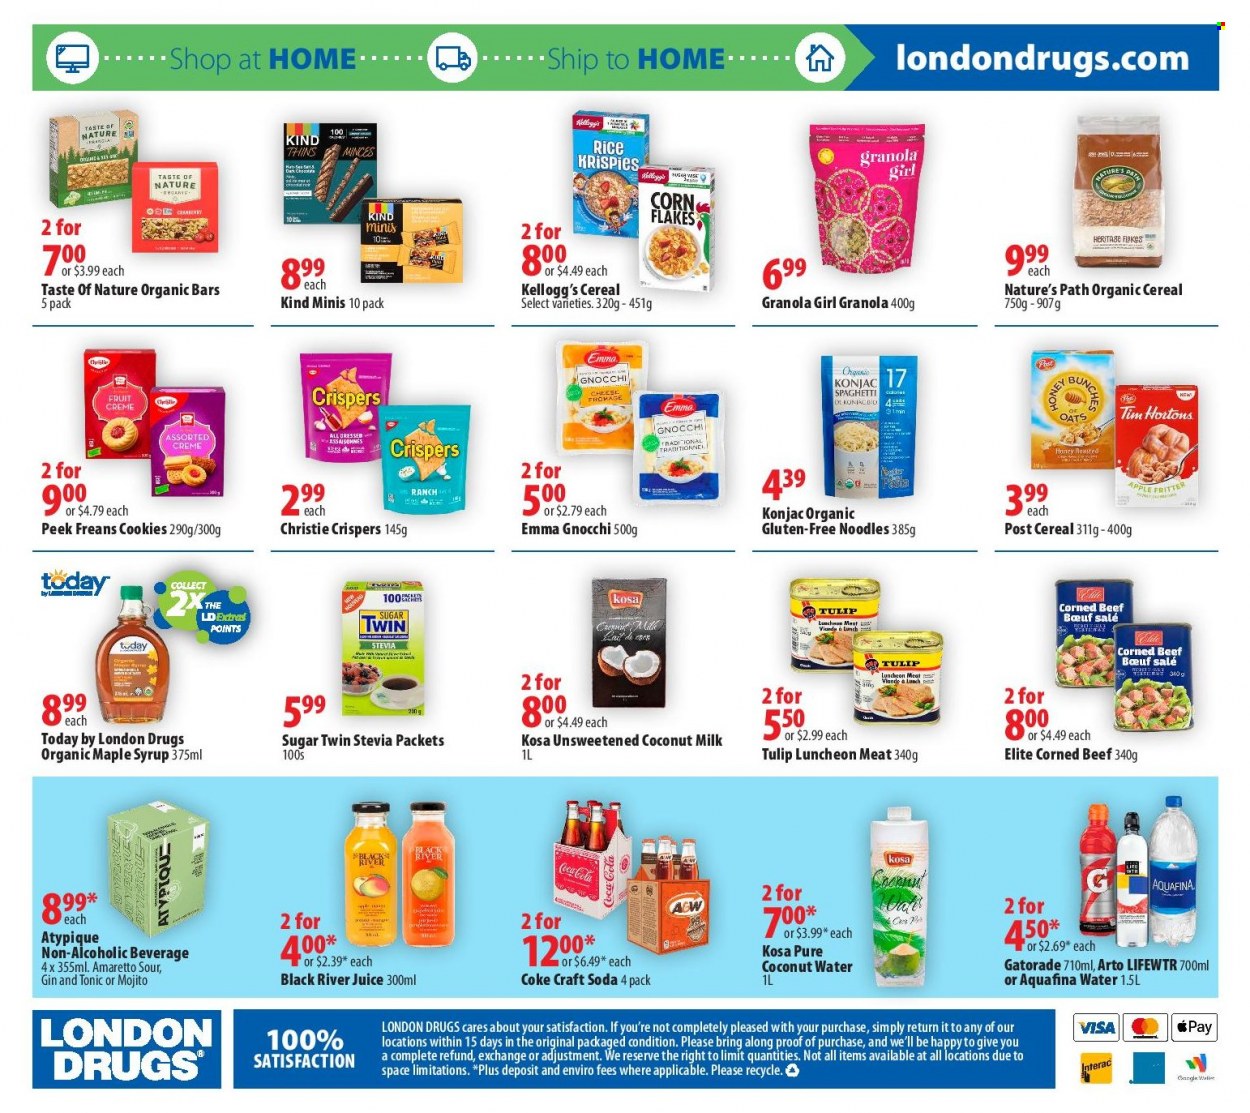 thumbnail - London Drugs Flyer - March 17, 2023 - March 22, 2023 - Sales products - cookies, Kellogg's, Thins, sugar, oats, stevia, coconut milk, corned beef, cereals, corn flakes, Rice Krispies, spaghetti, noodles, maple syrup, honey, syrup, Coca-Cola, juice, coconut water, Gatorade, Coke, Aquafina, soda, Lifewtr, water, Amaretto, gin, gin & tonic, granola. Page 8.